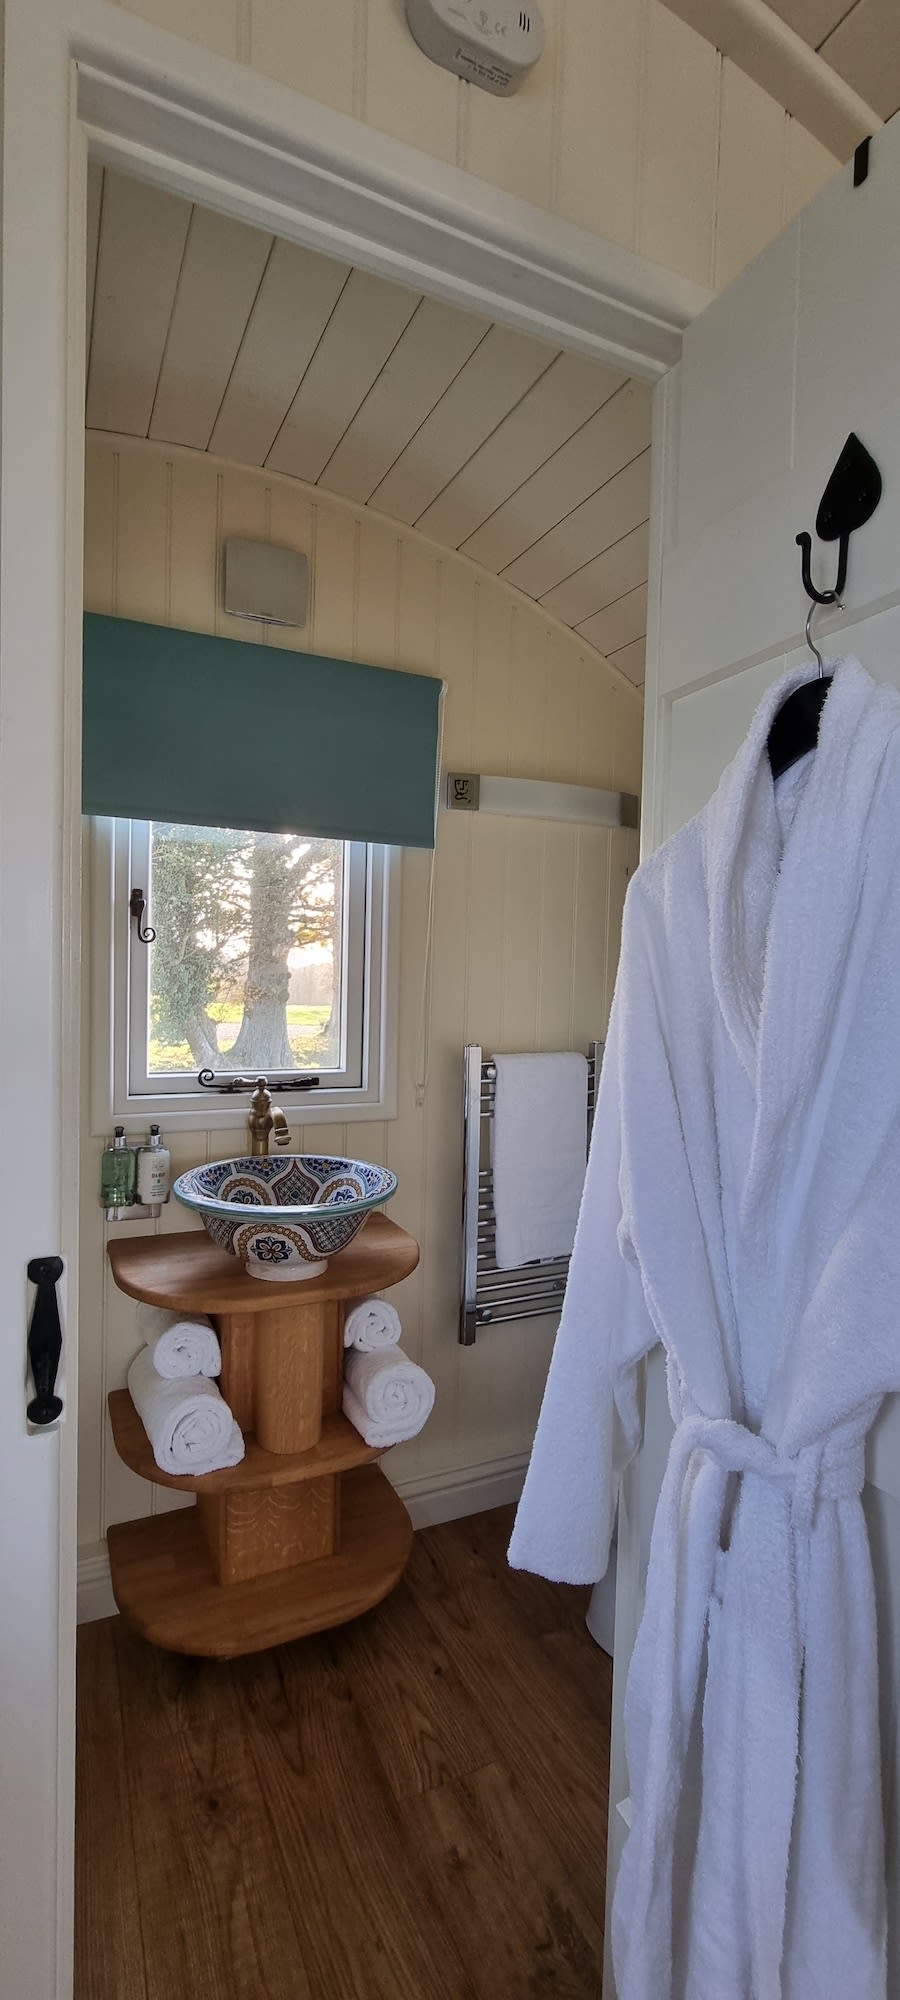 Fluffy bath robes, towels and slippers are provided as standard.